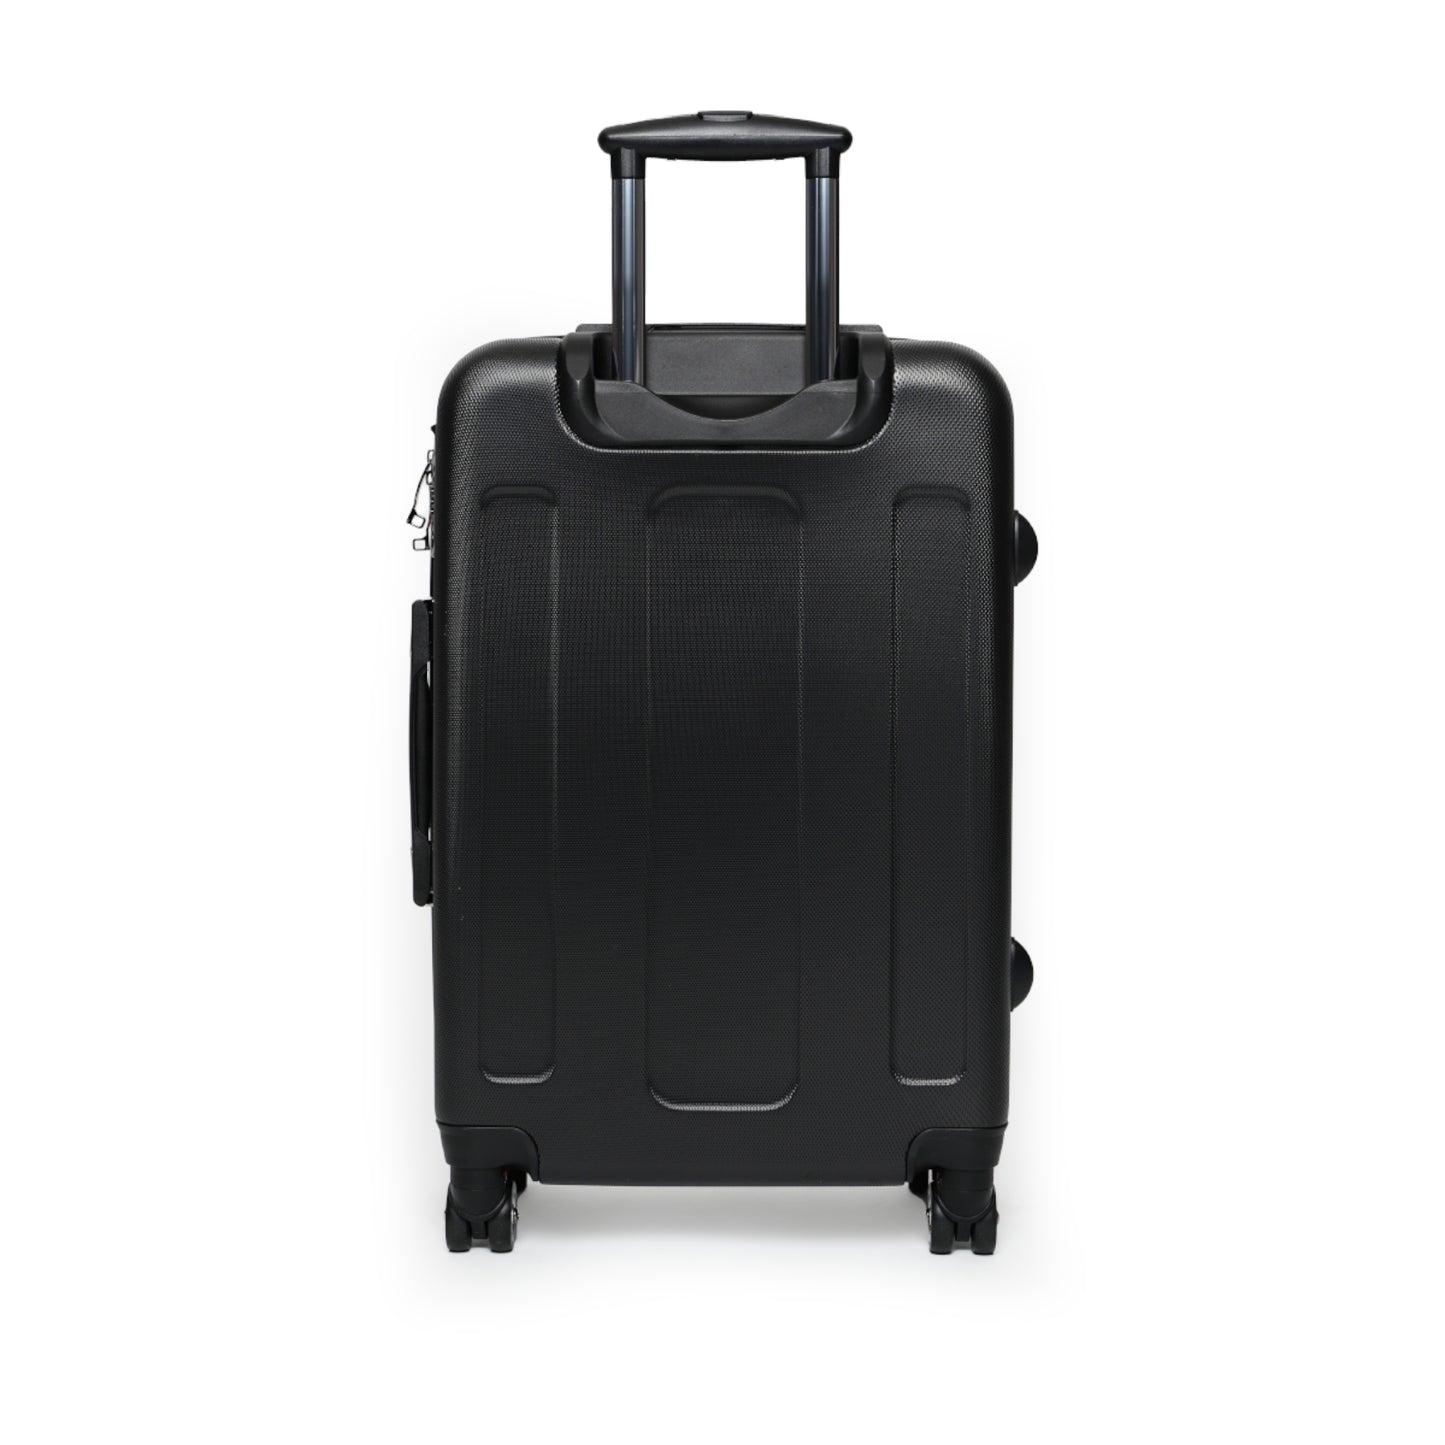 DuGamii Luxury Carry Suitcase With Wheels and Security Lock